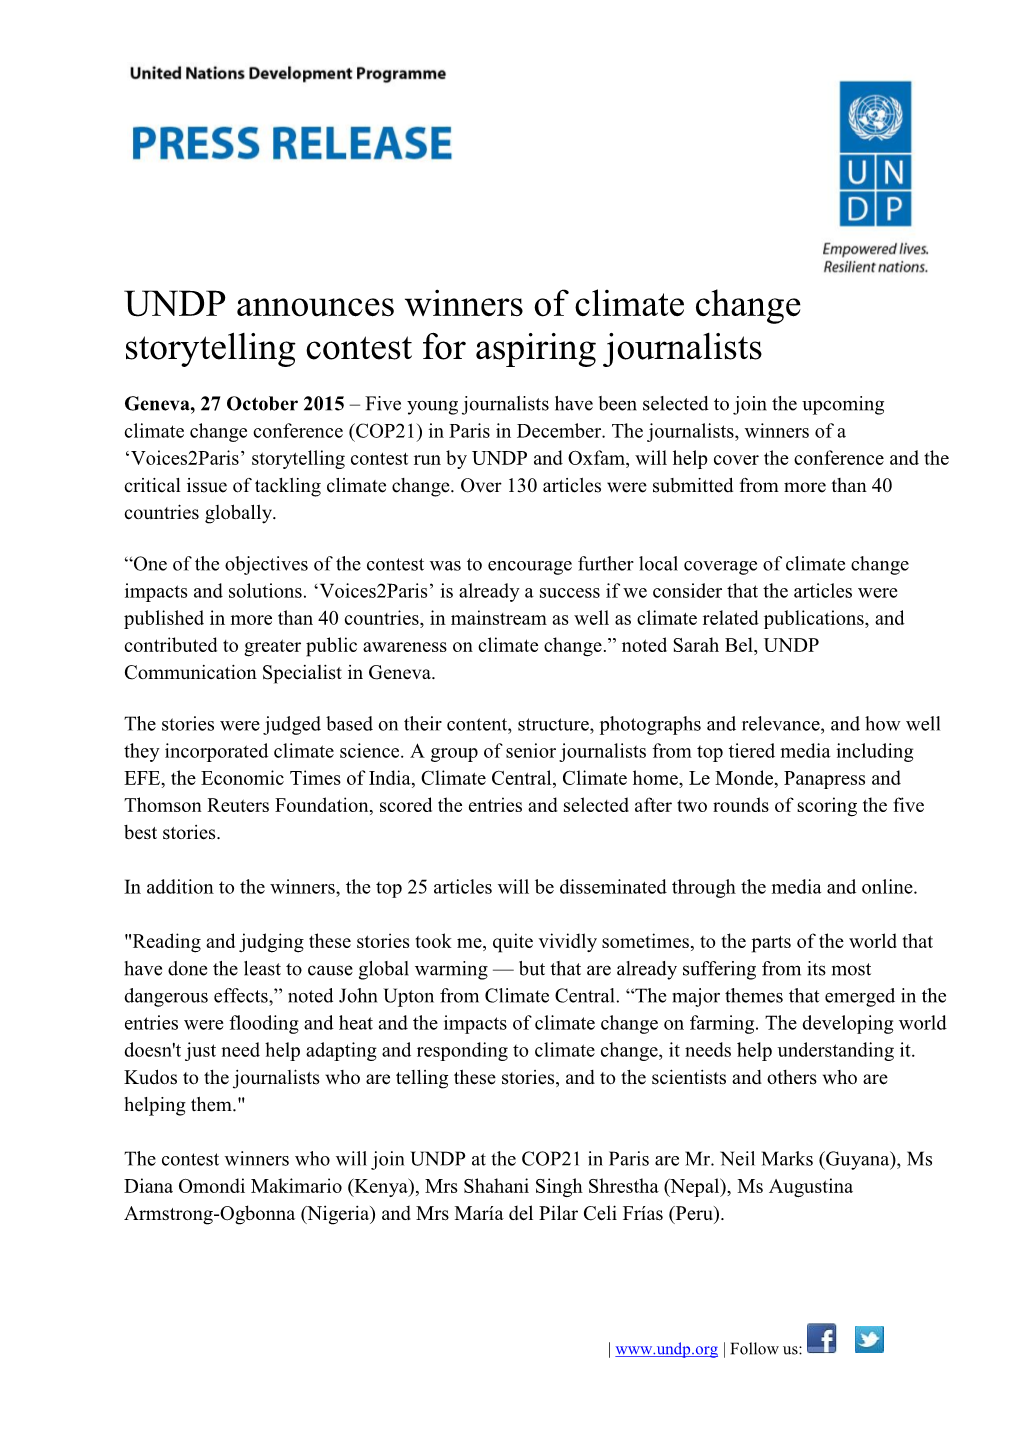 UNDP Press Release with Boilerplate Eng Letter: Update with Contact Information